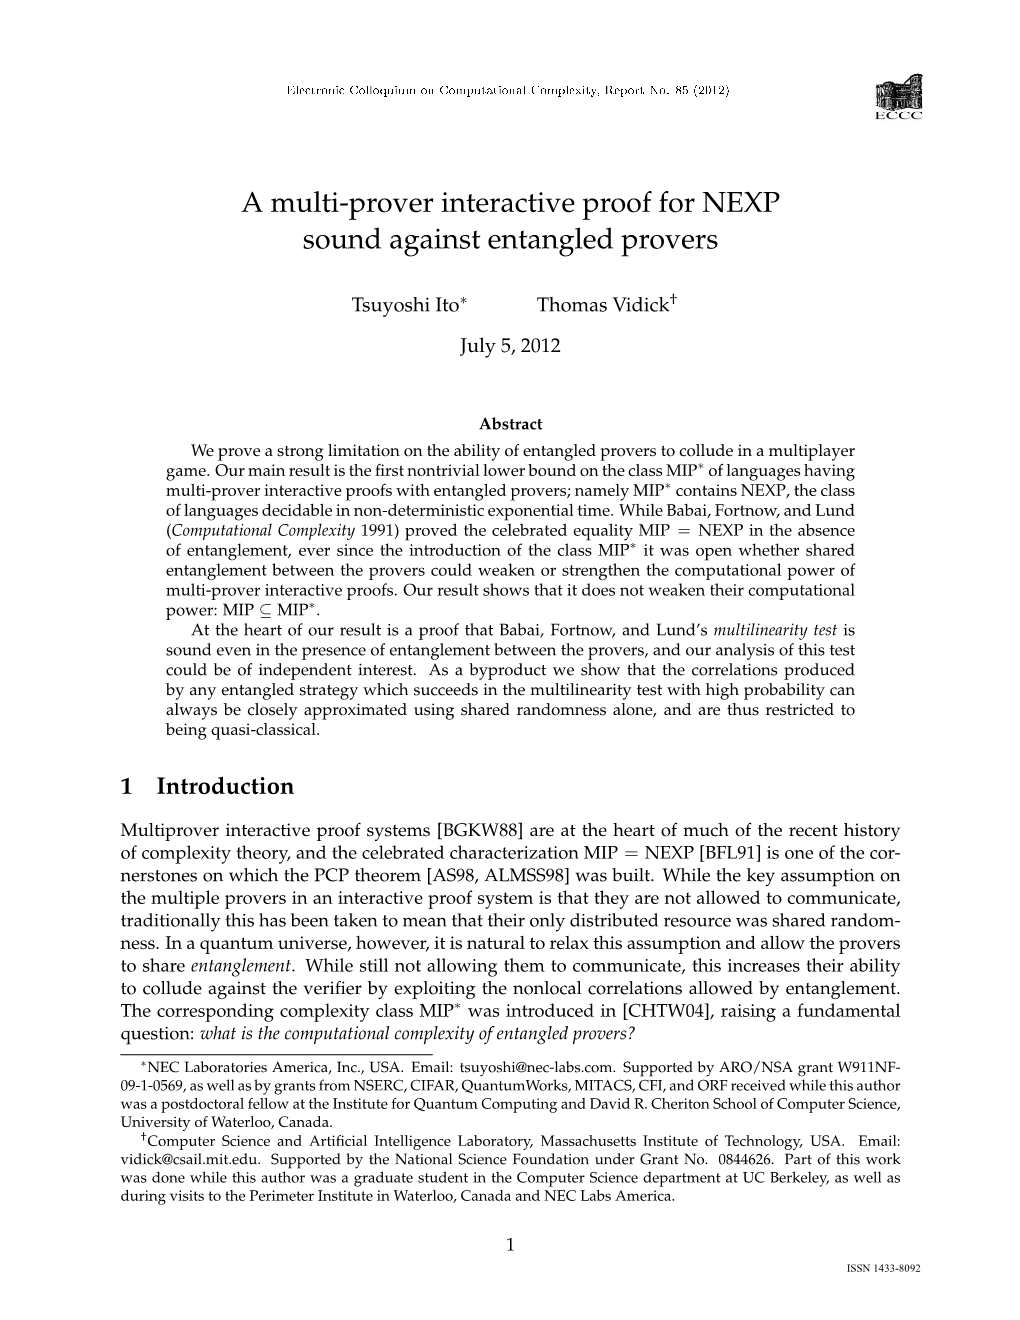 A Multi-Prover Interactive Proof for NEXP Sound Against Entangled Provers